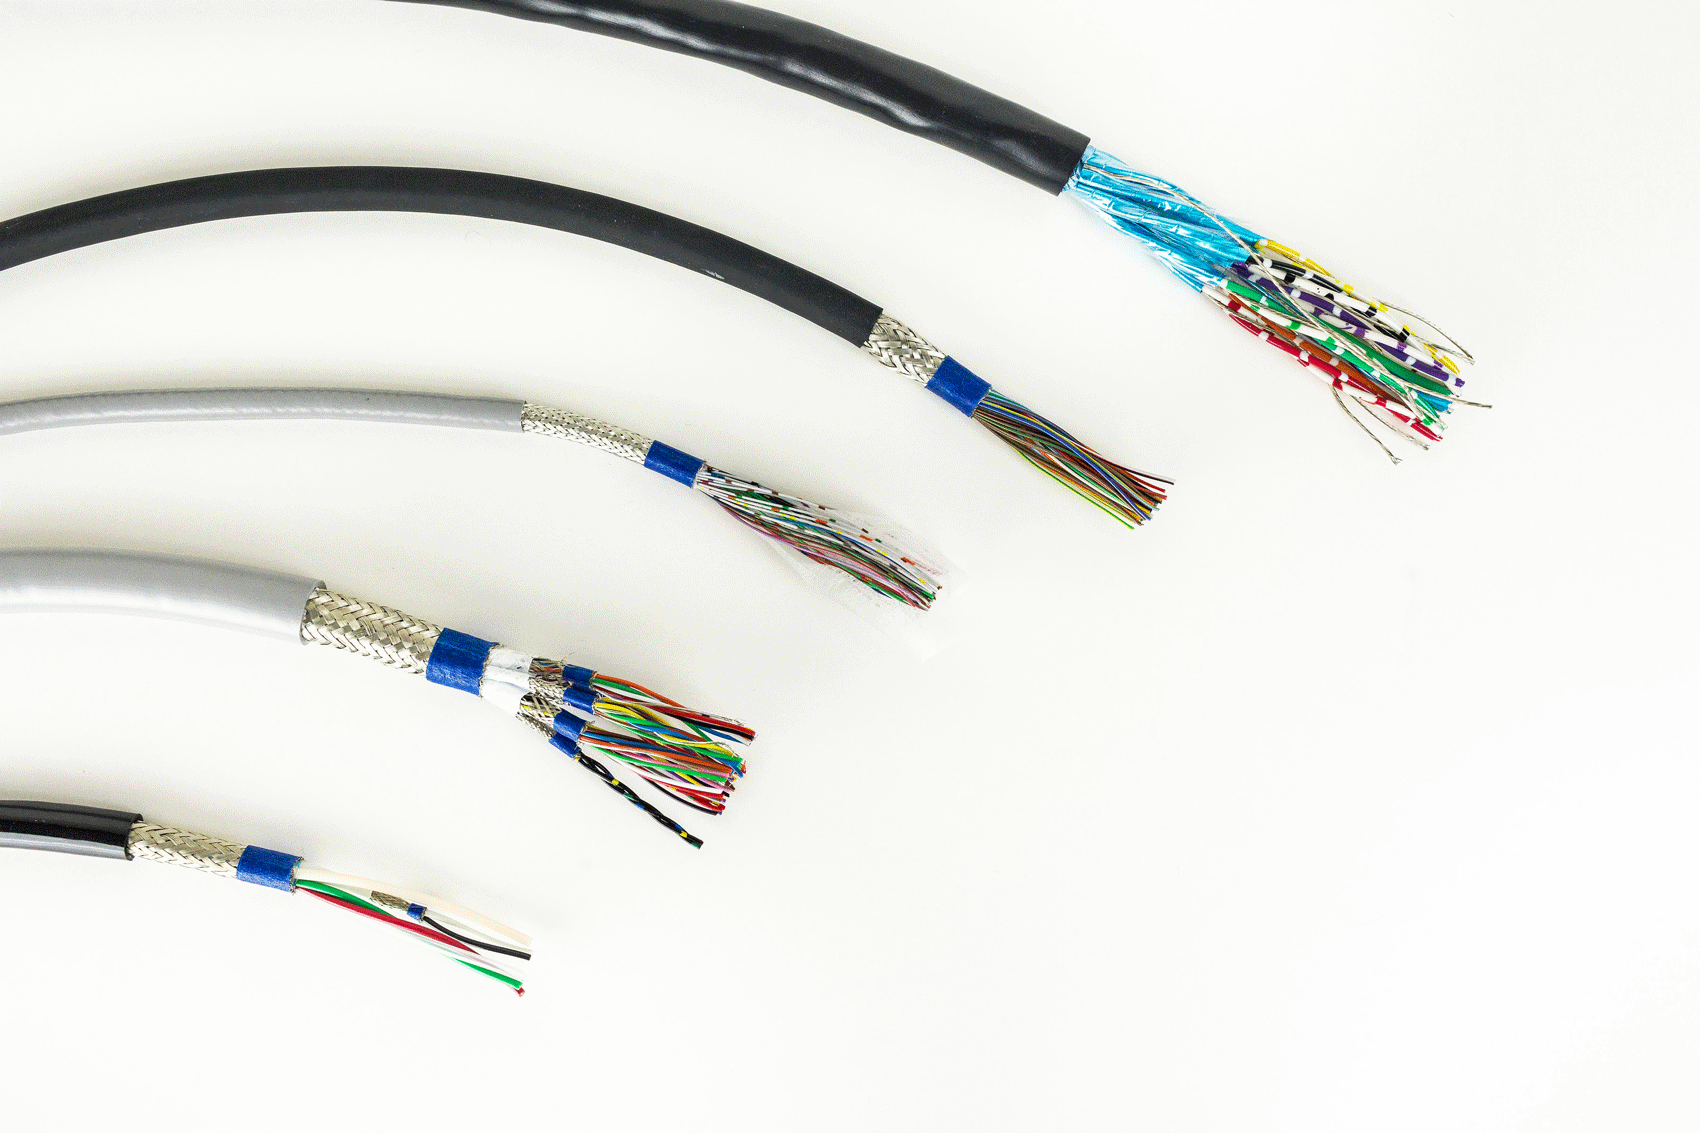 Closeup of 5 cables with interior exposed on white background showing some of Northwire's custom cable solutions